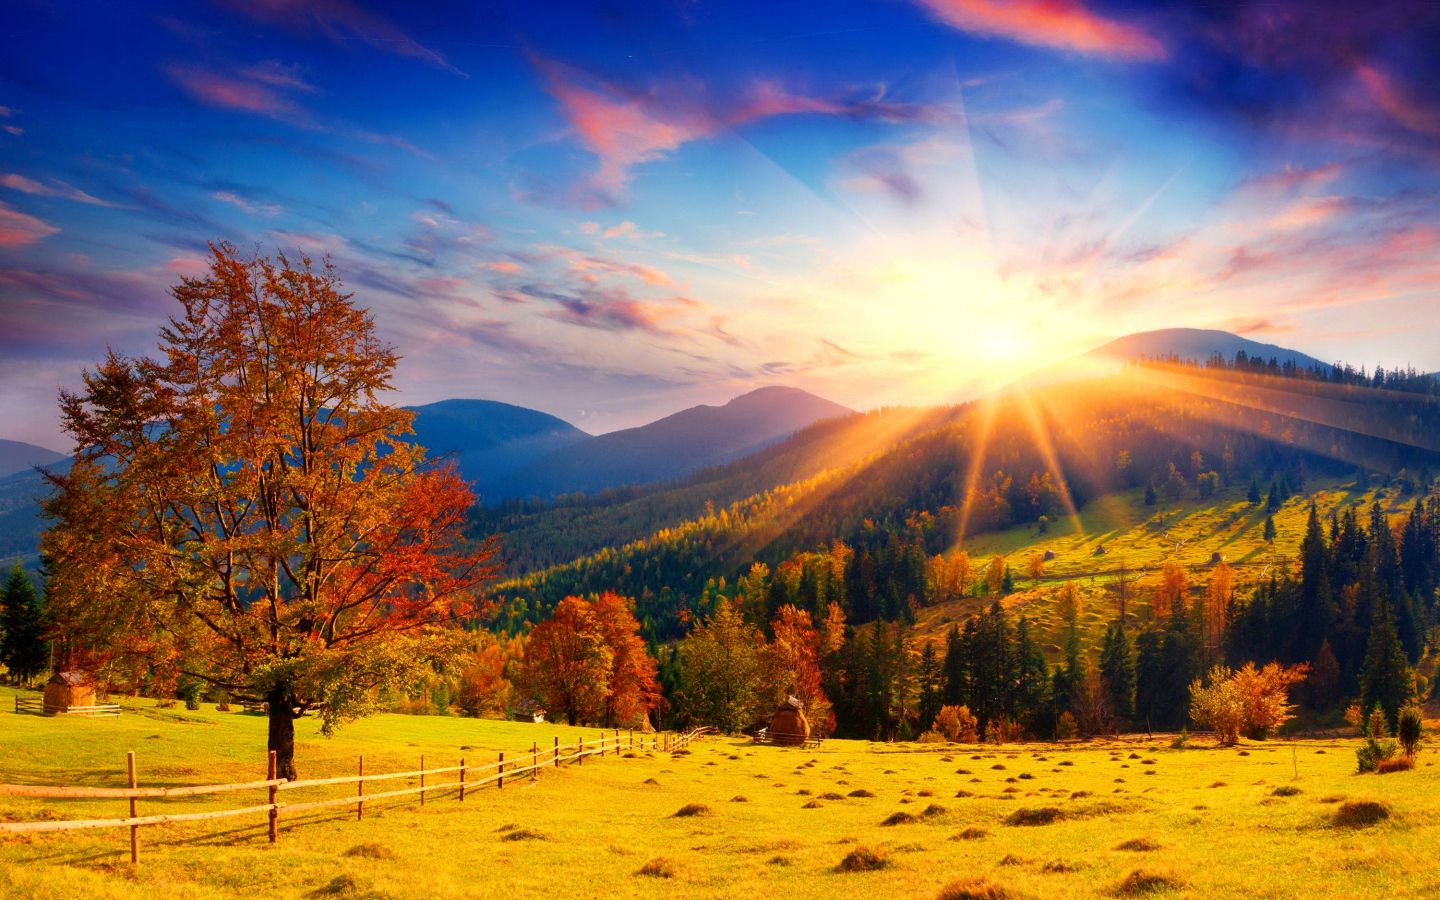 Autumn field with trees in the rays of a bright sun Desktop wallpaper 1440x900